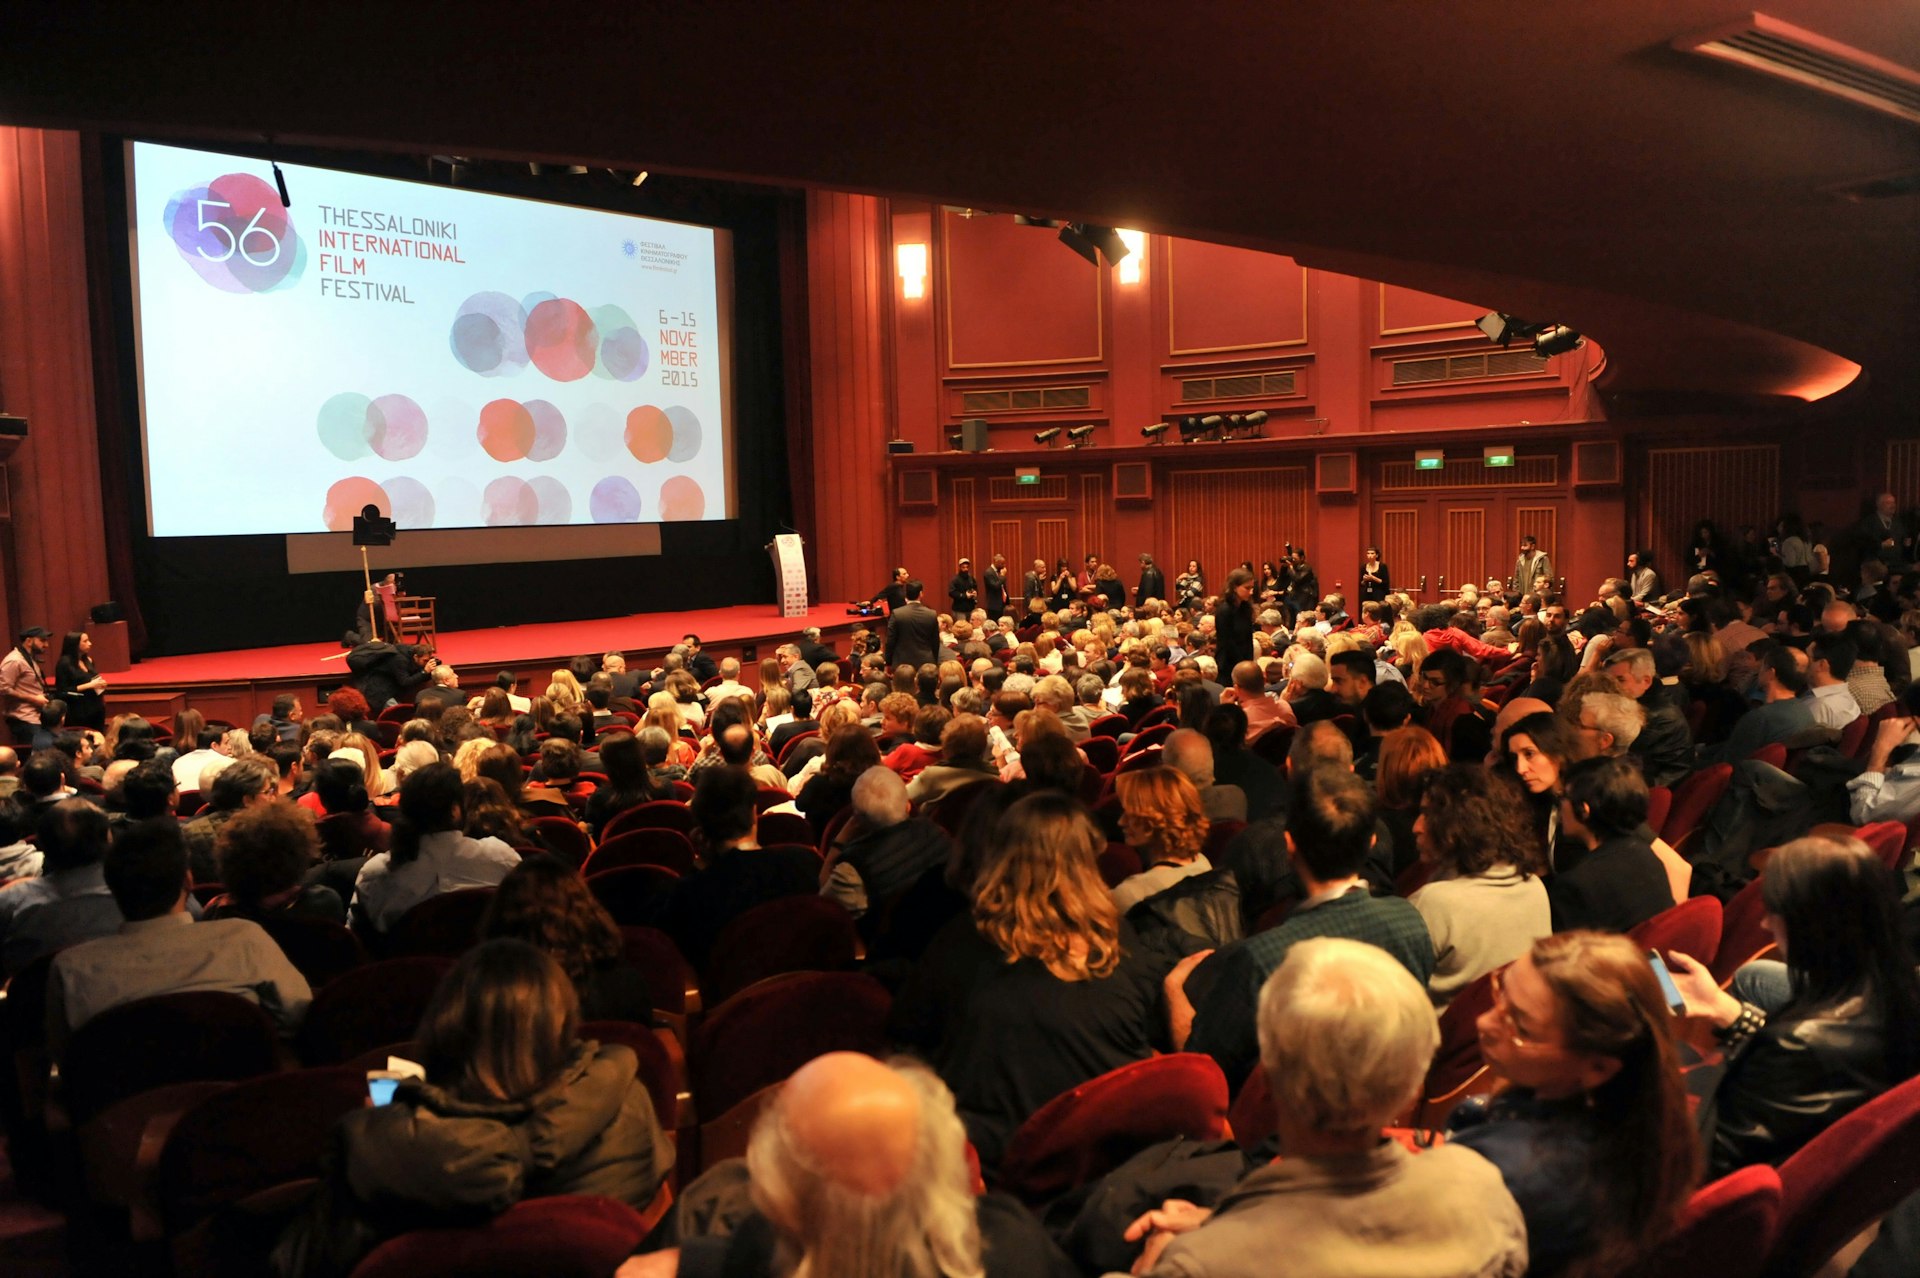 Audience awaits the opening ceremony at the Thessaloniki International Film Festival, Greece